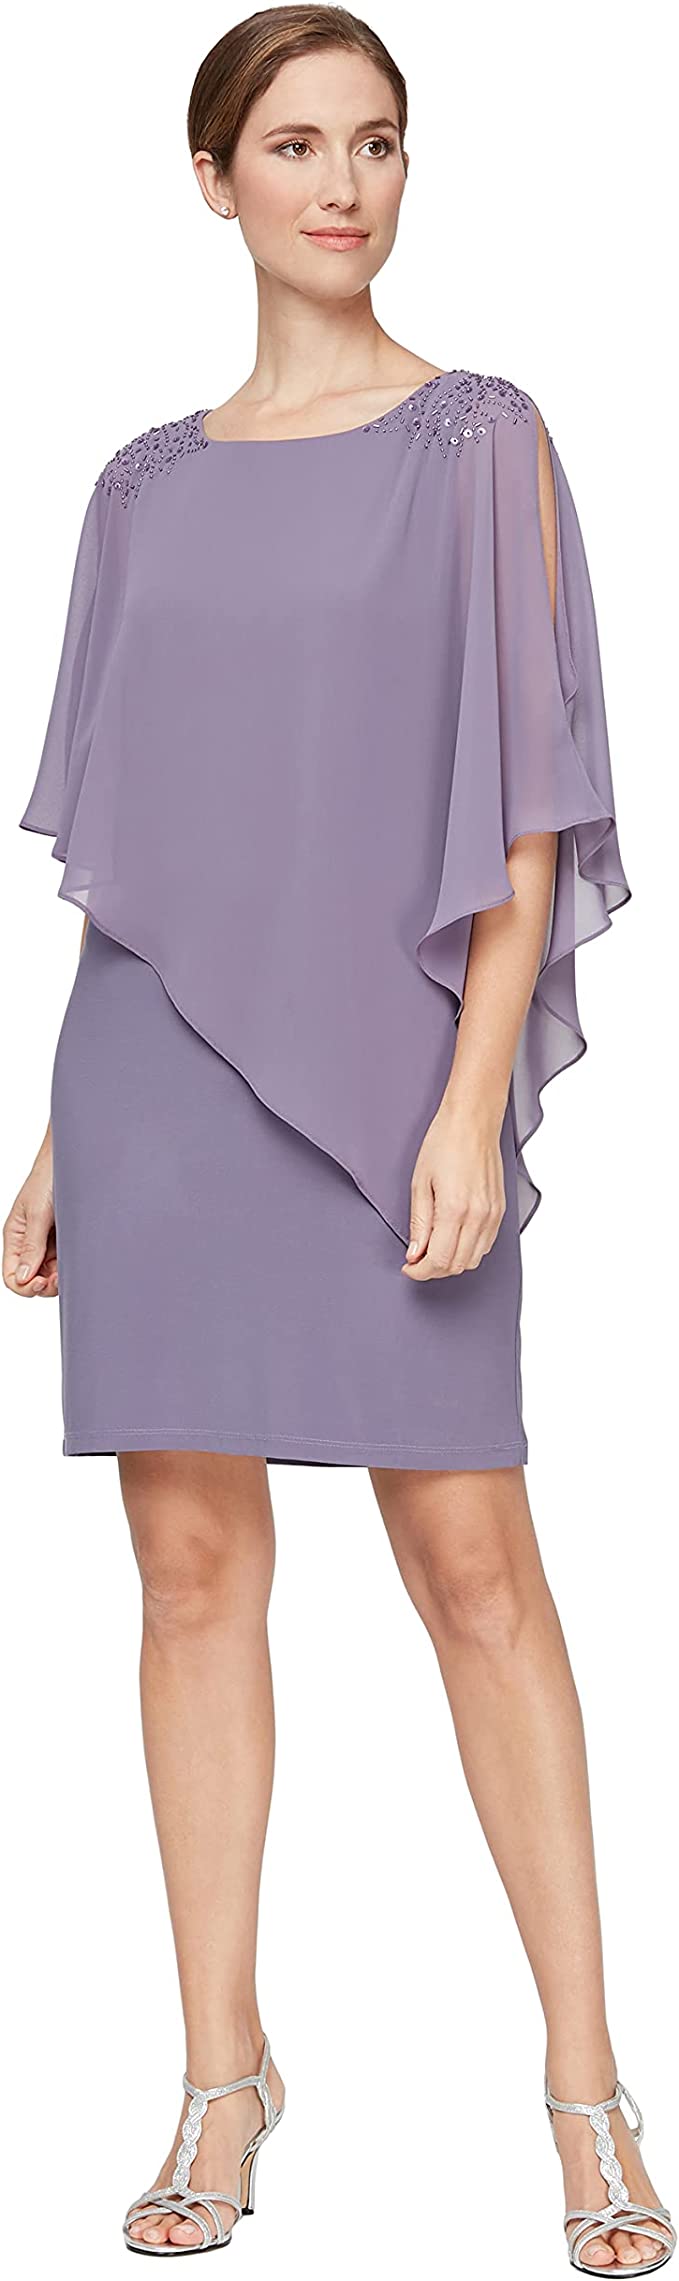 SLNY Icy Orchid Sleeveless Dress with Attached Chiffon Cape